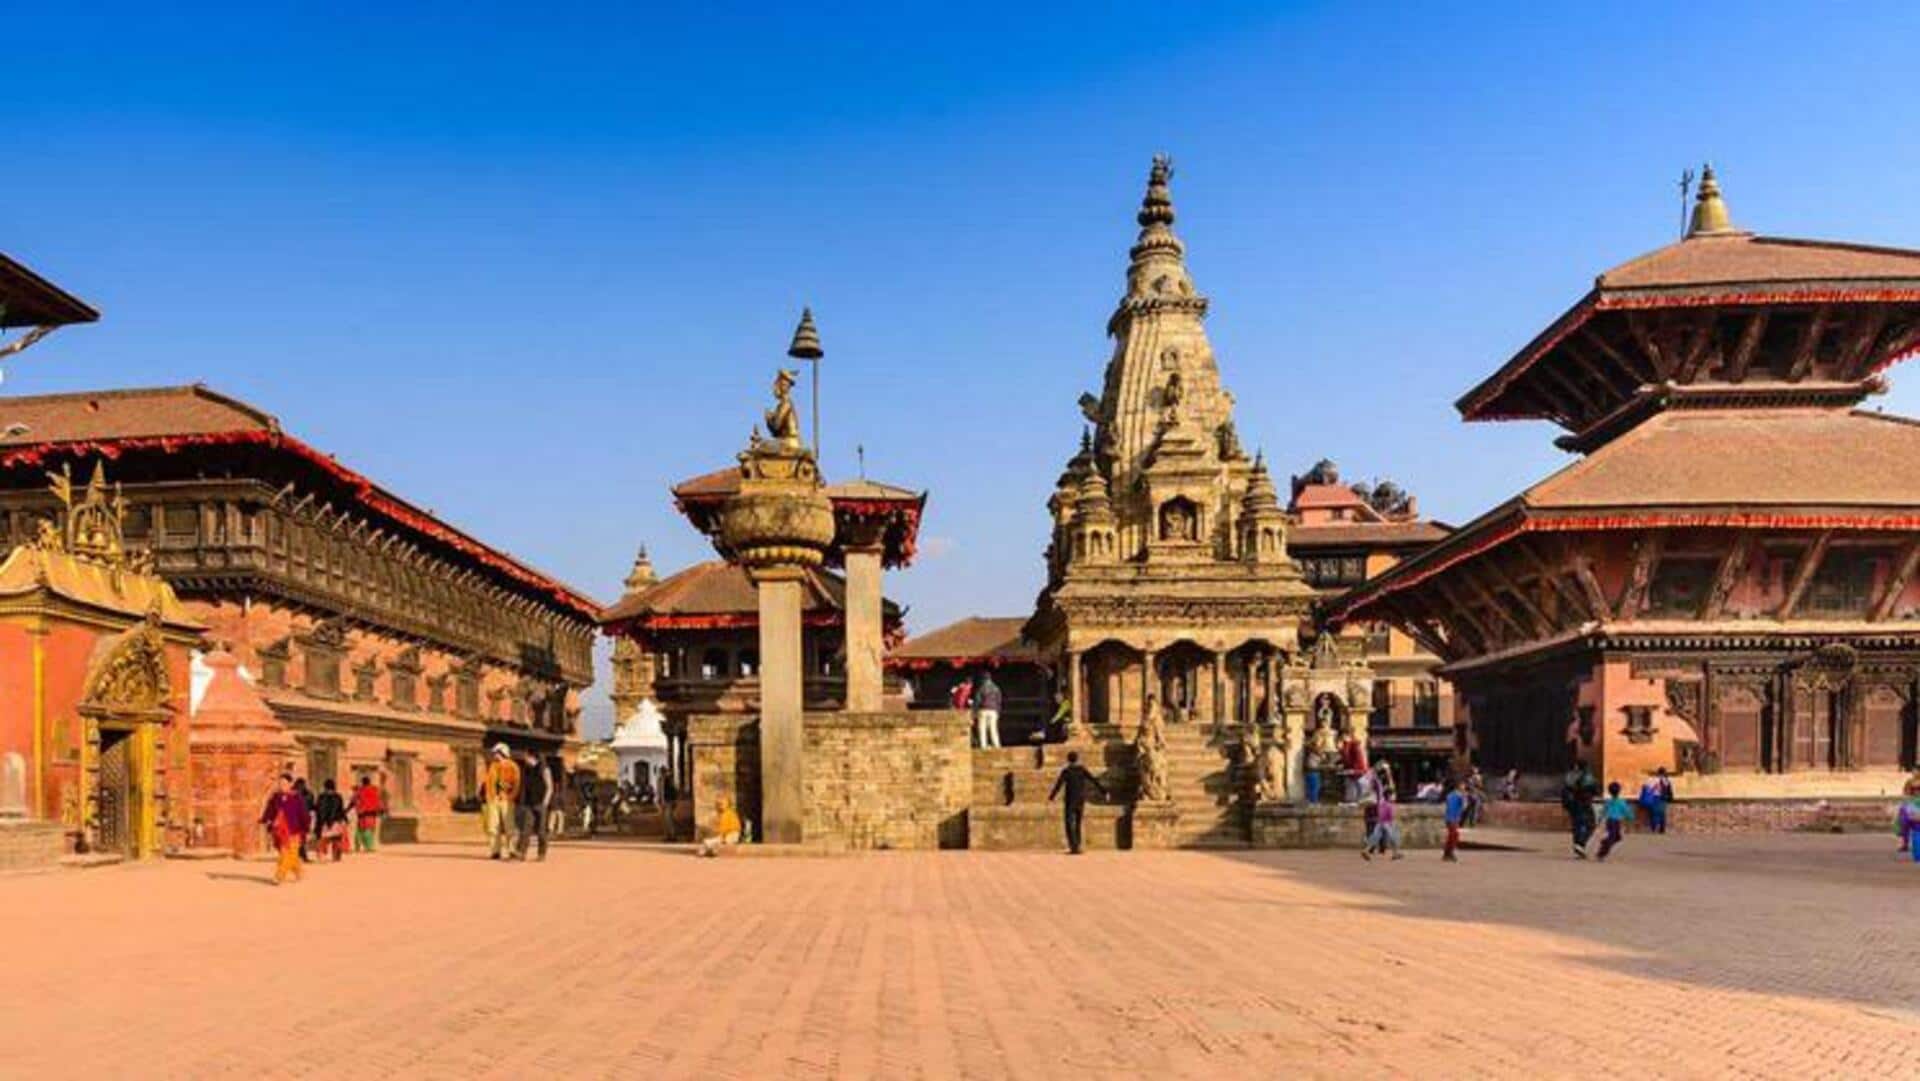 Refer to this travel guide if you're visiting Bhaktapur, Nepal